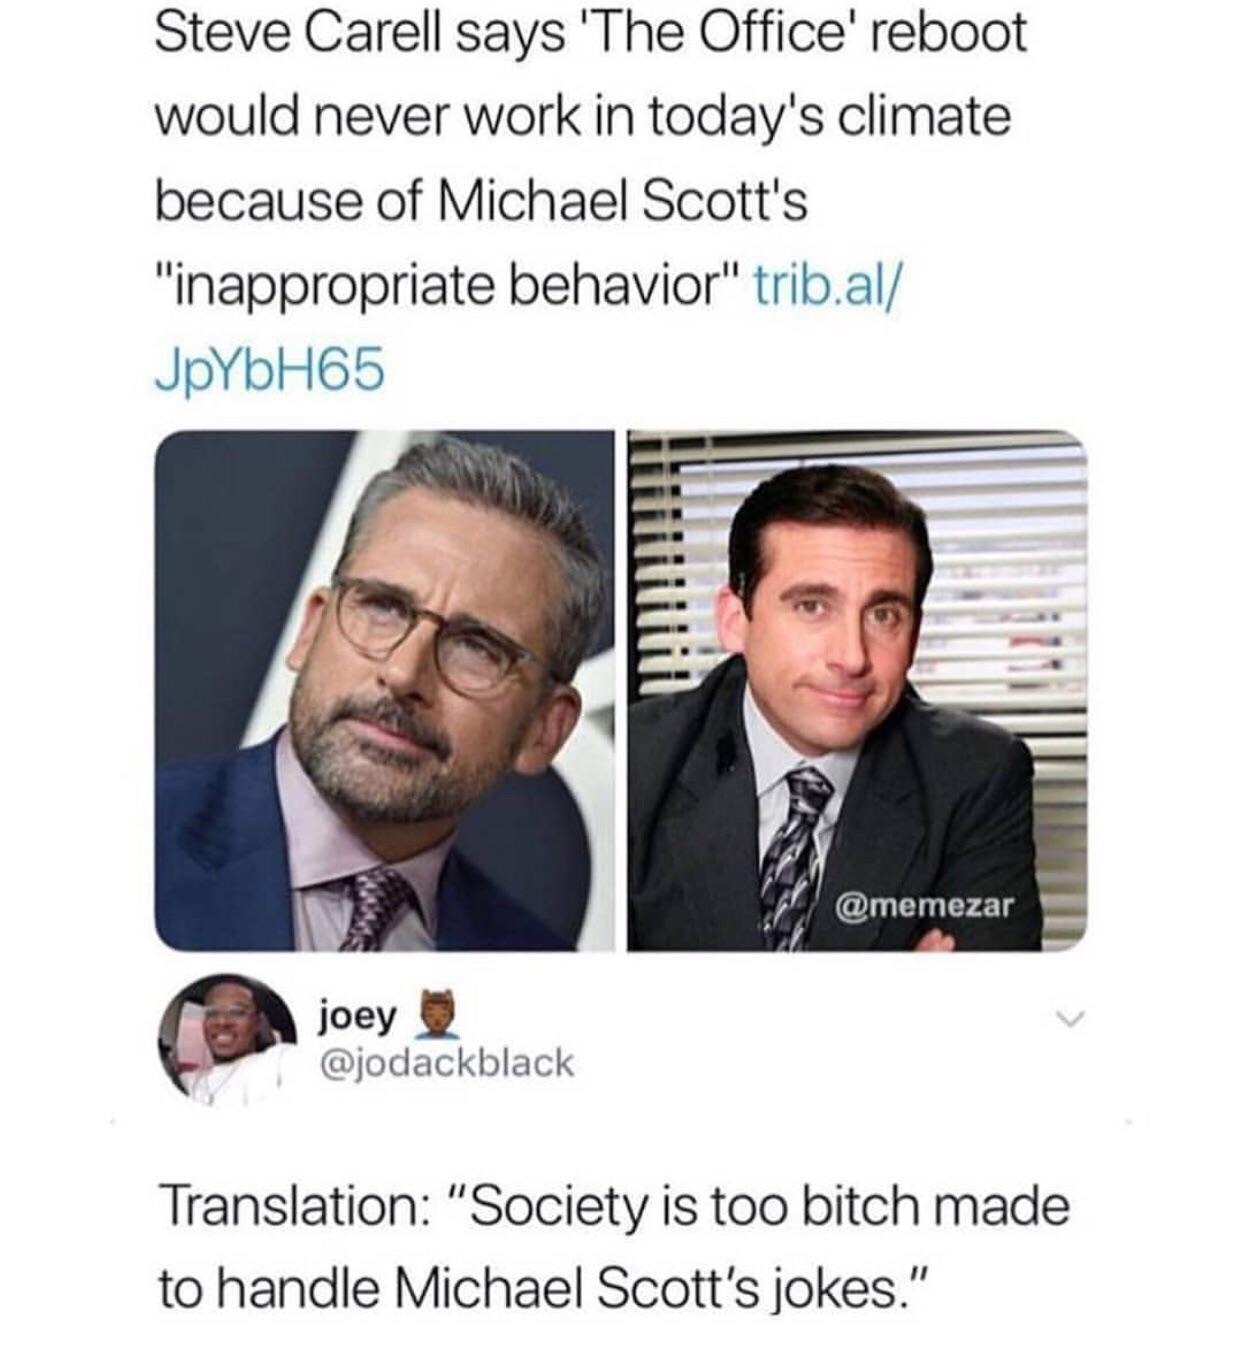 steve carell on office reboot - Steve Carell says 'The Office' reboot would never work in today's climate because of Michael Scott's "inappropriate behavior" trib.al JpYbH65 joey Translation "Society is too bitch made to handle Michael Scott's jokes."